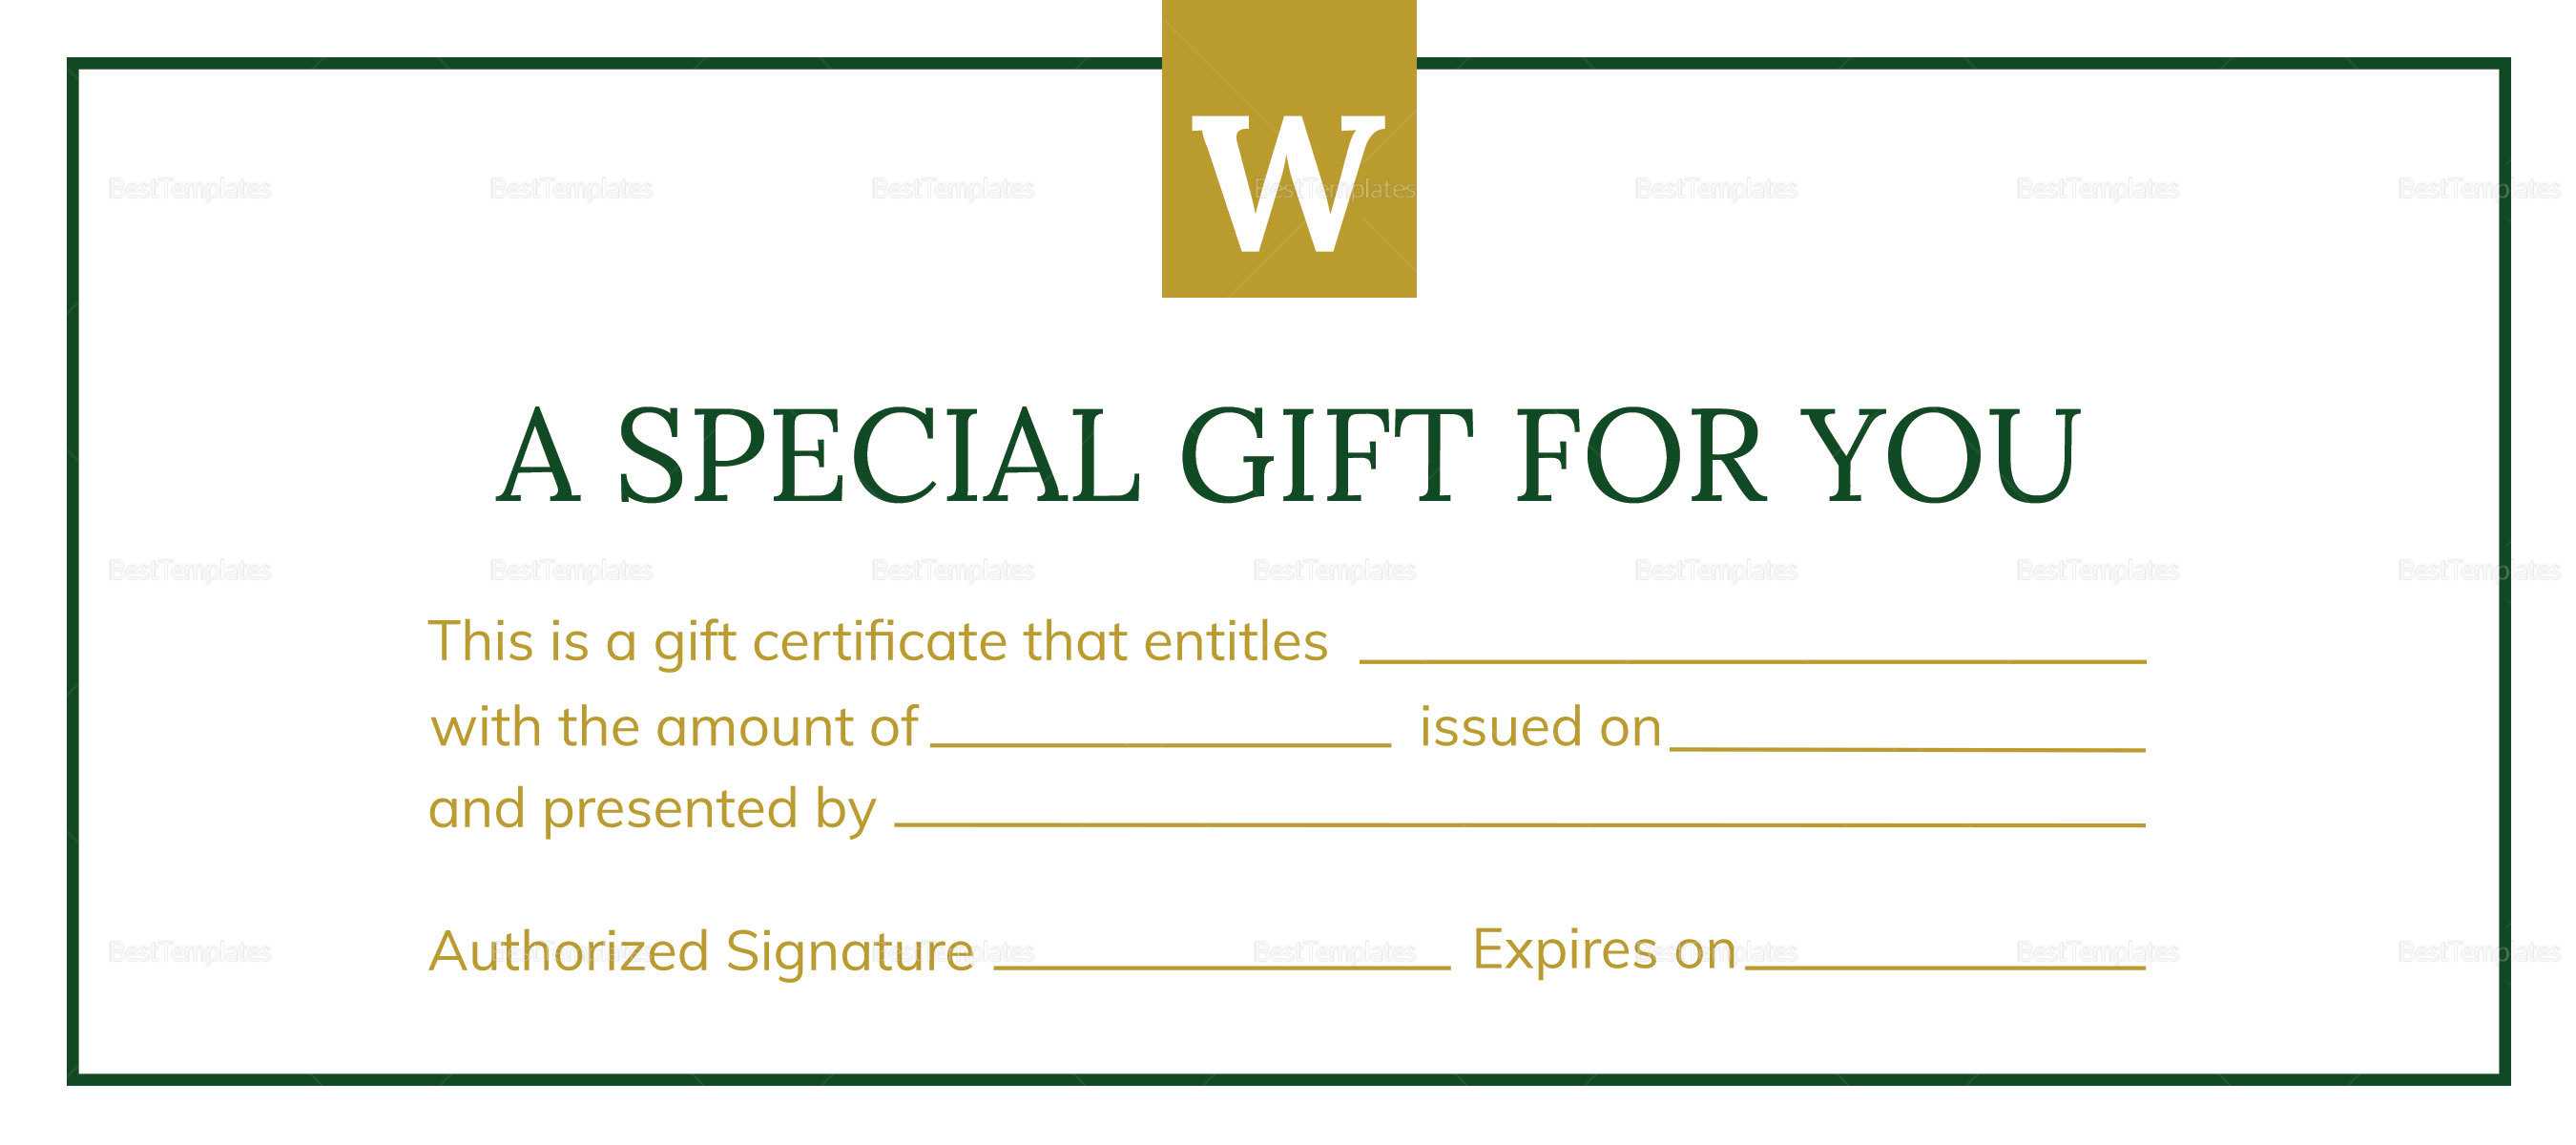 Hotel Gift Certificate Template Pertaining To Gift Certificate Template Publisher